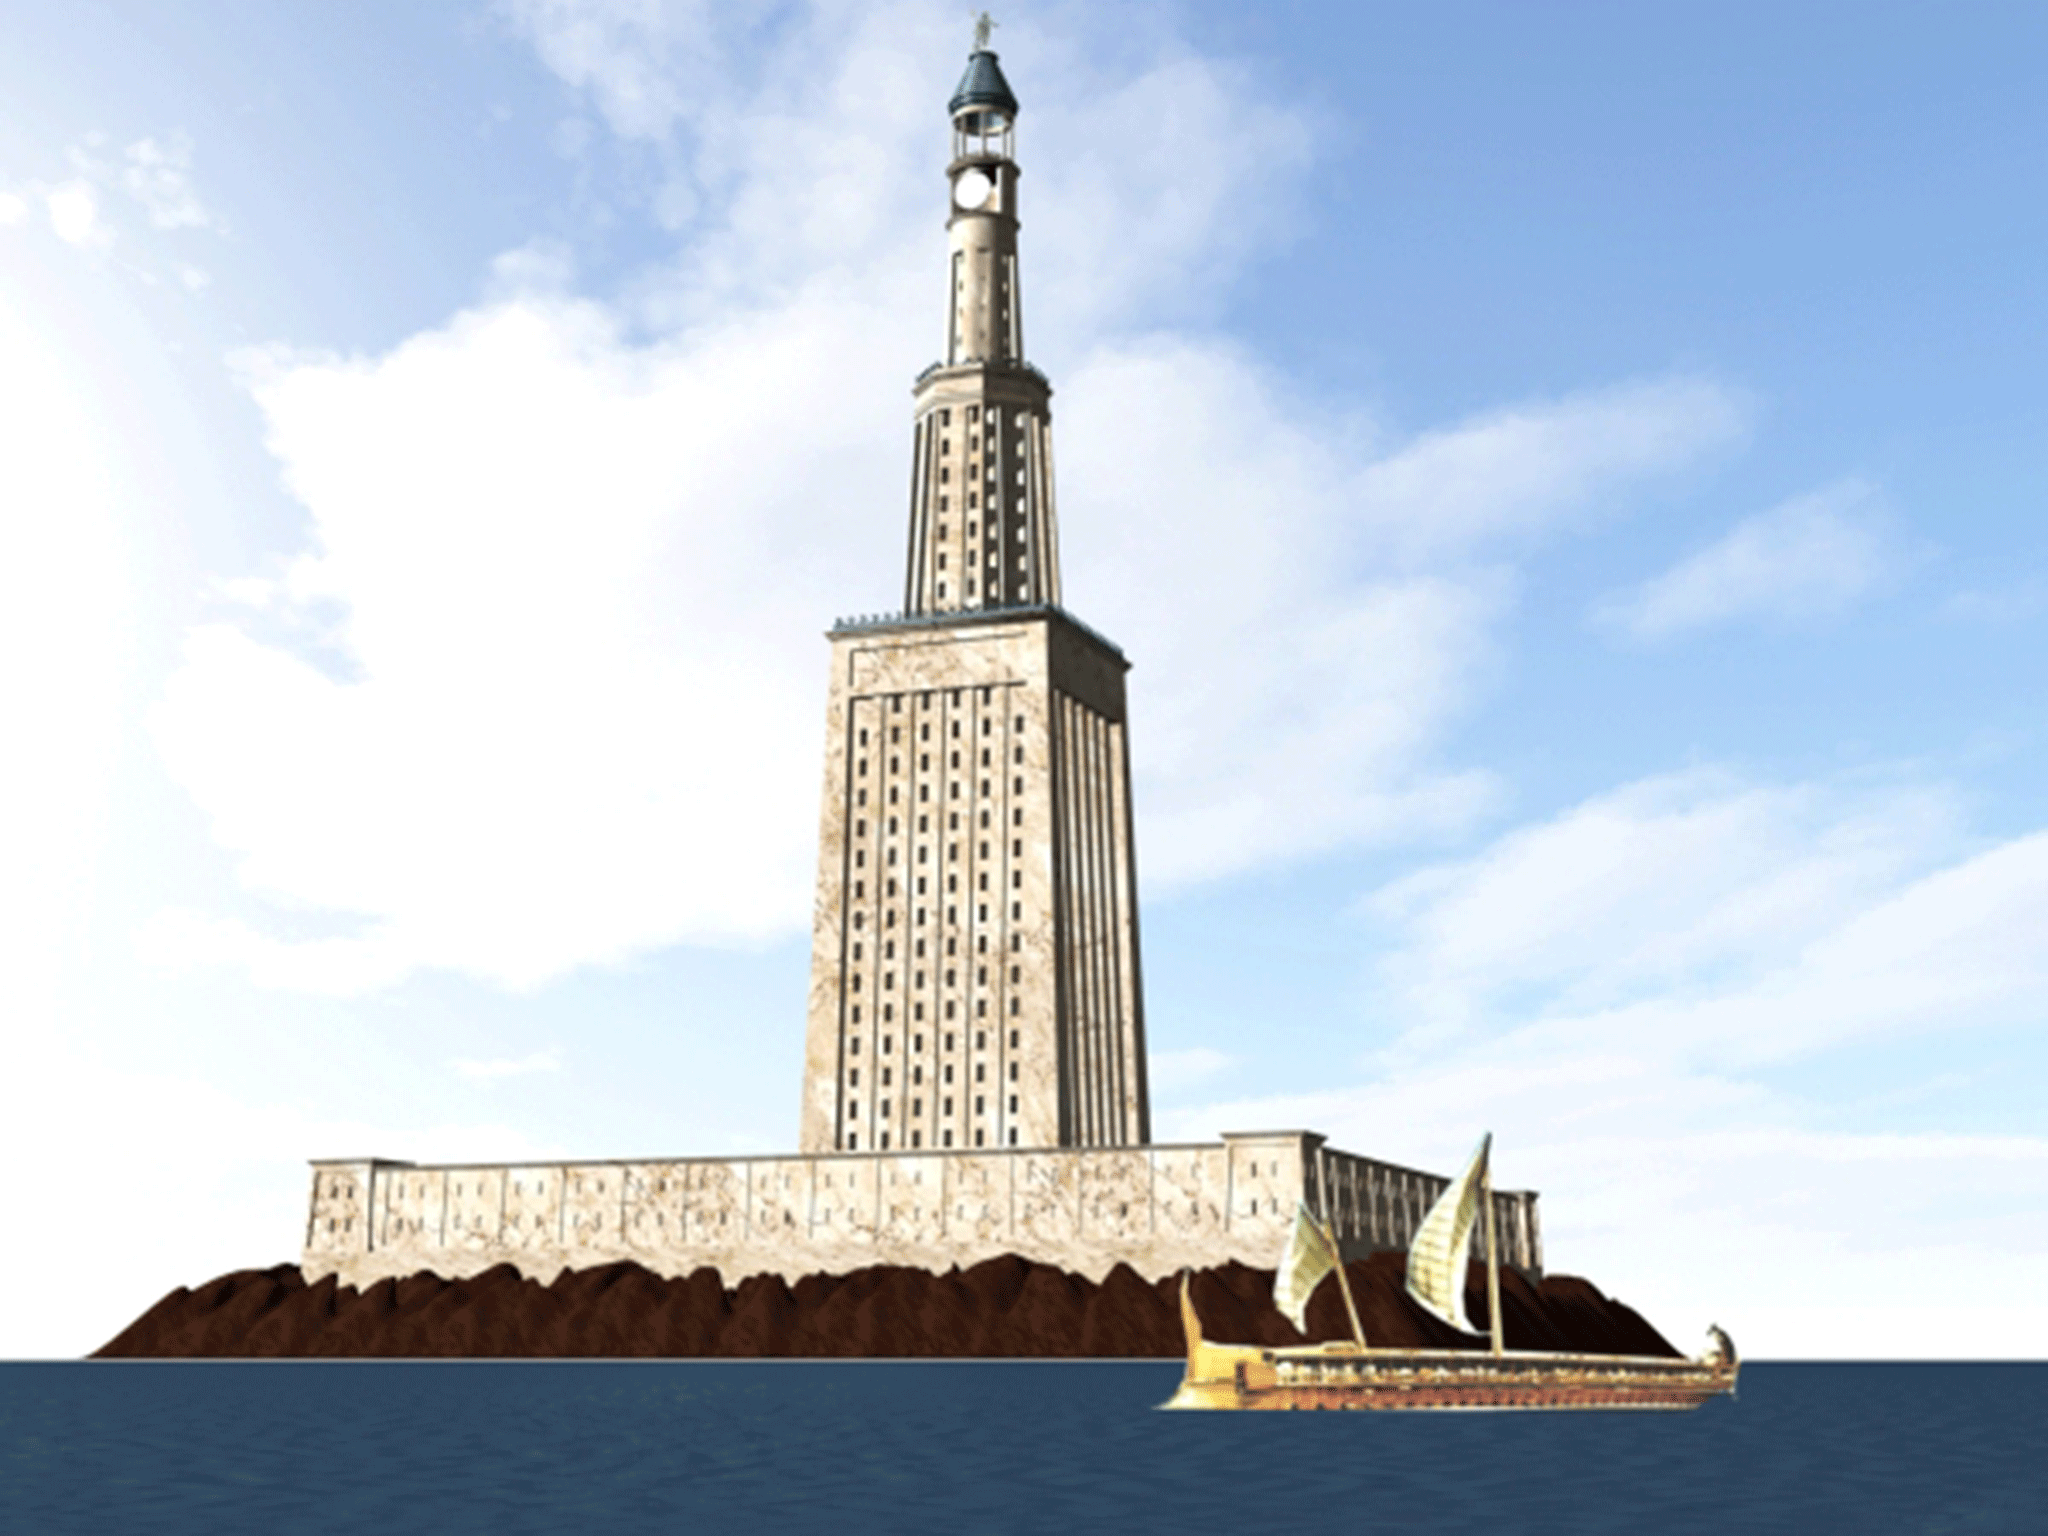 How the Lighthouse of Alexandria likely looked, based on a reconstructive study